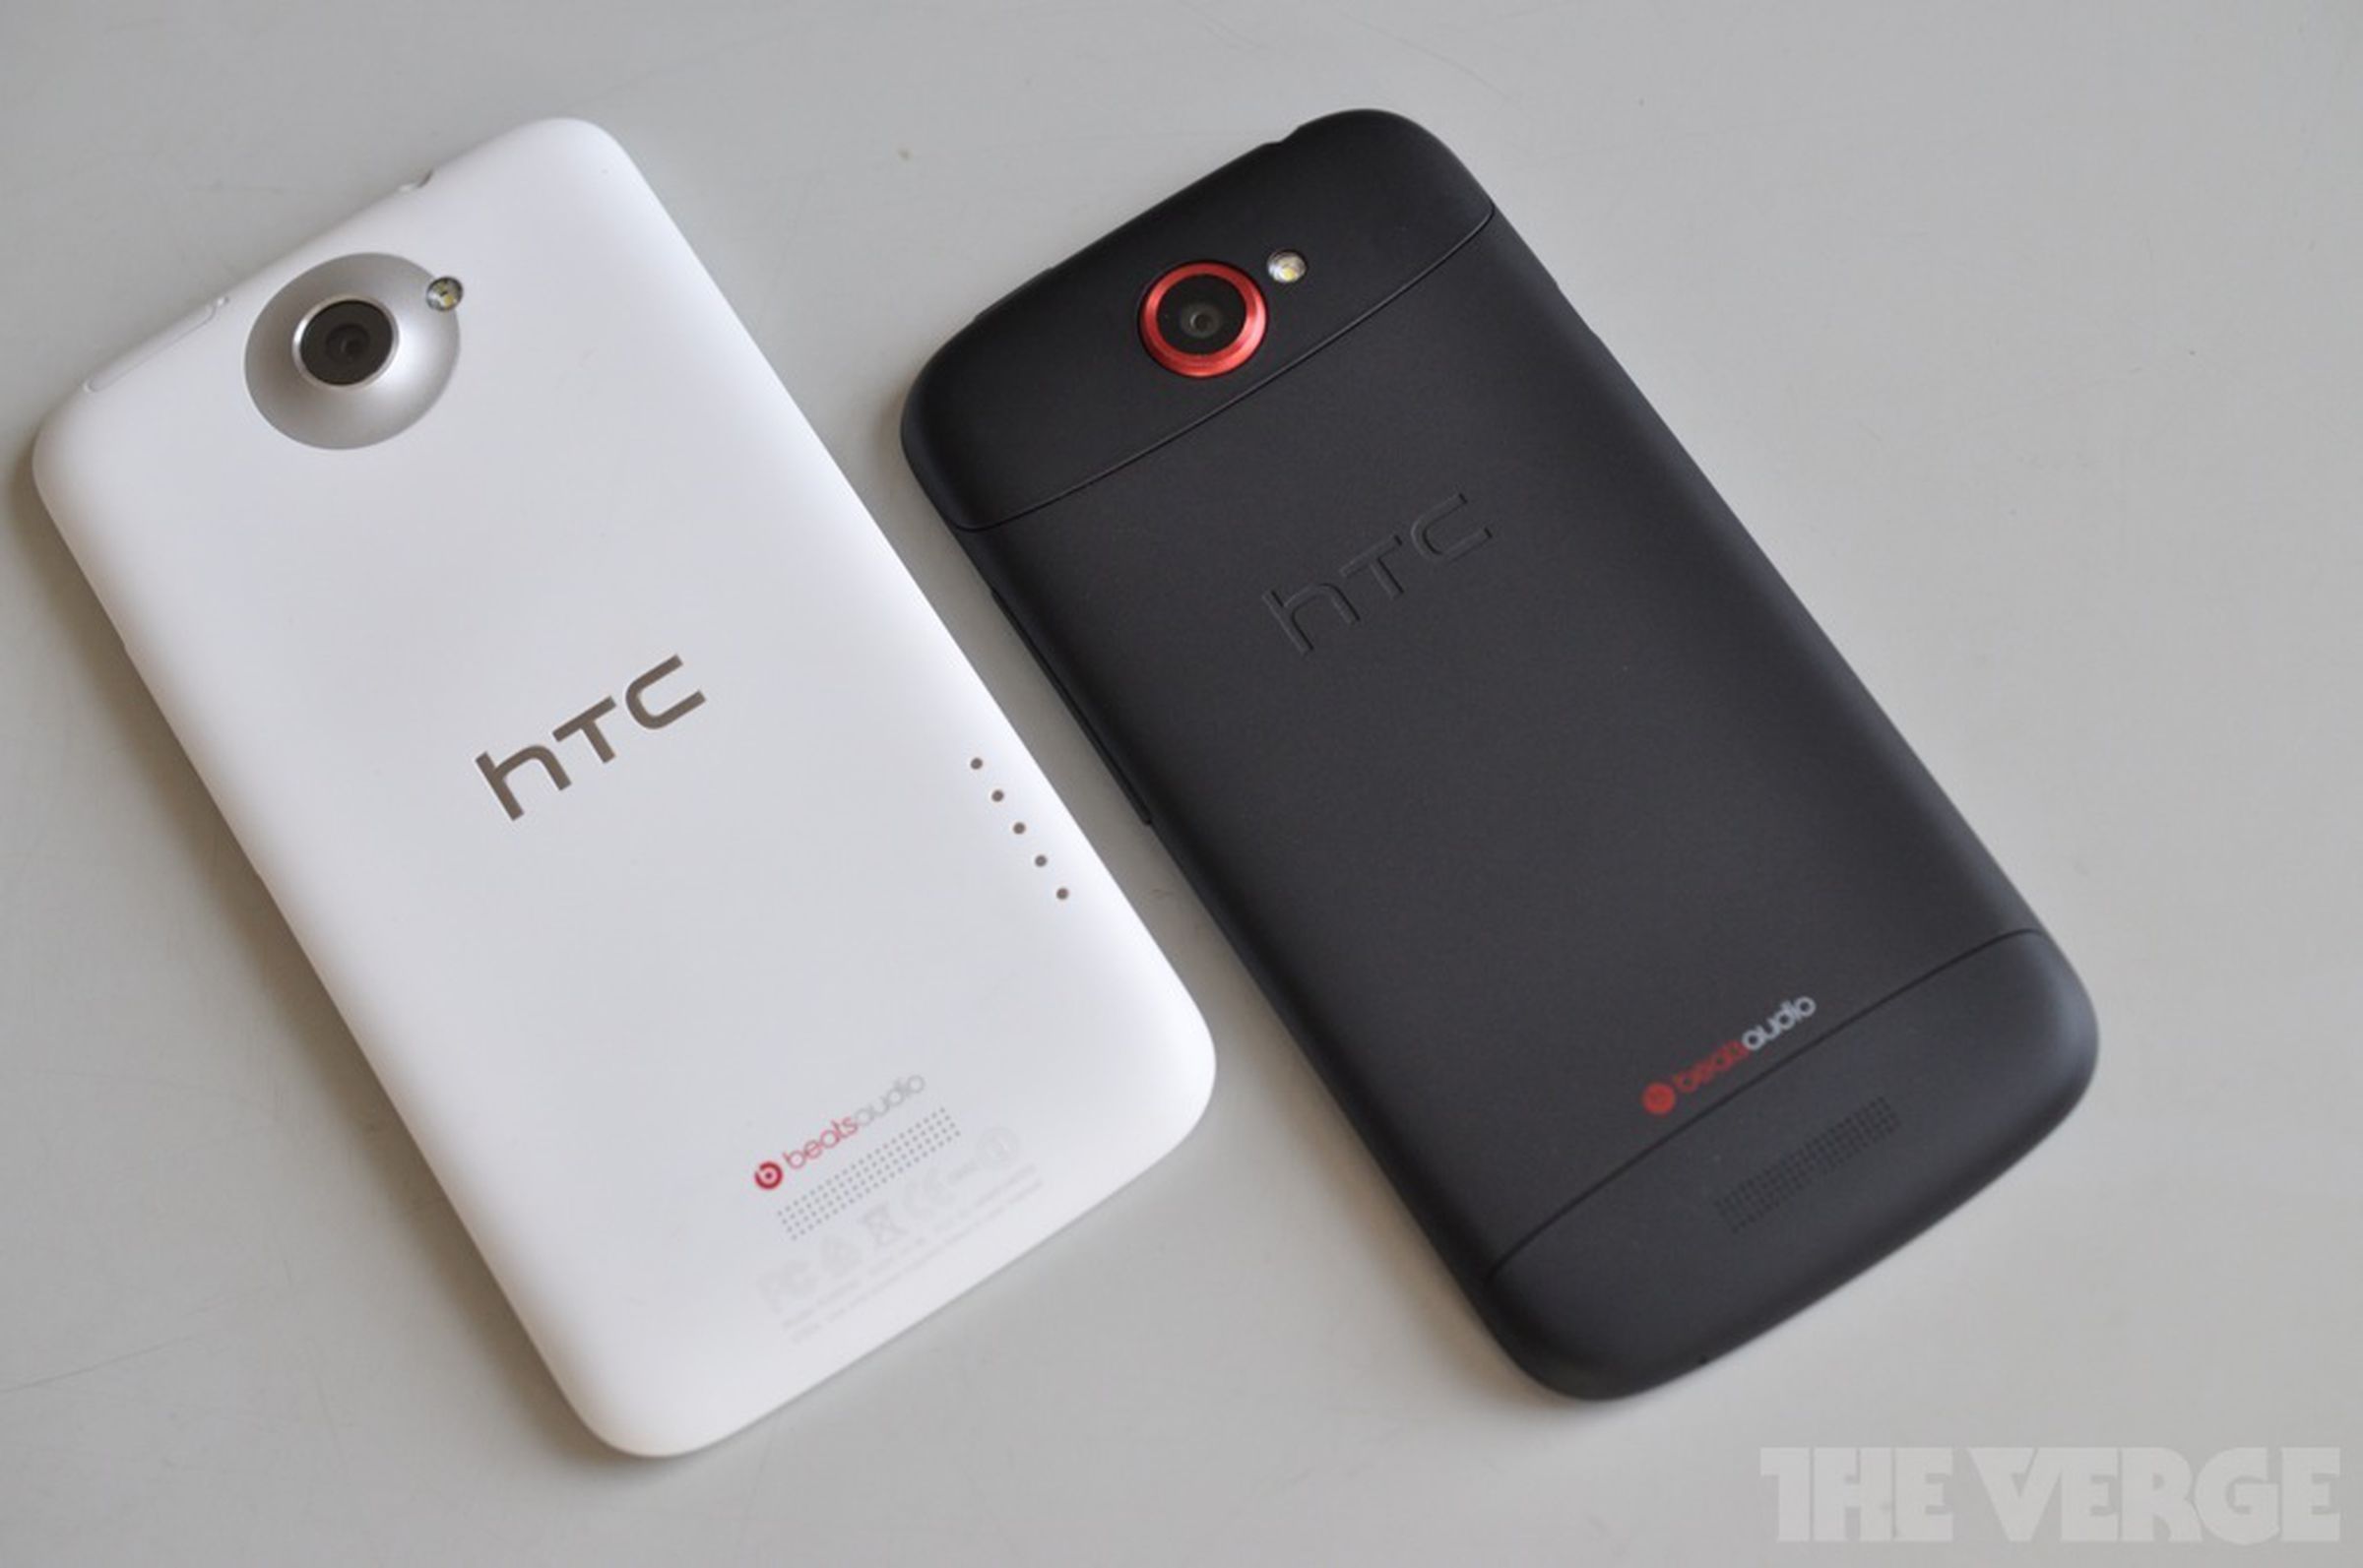 HTC One S vs. One X pictures